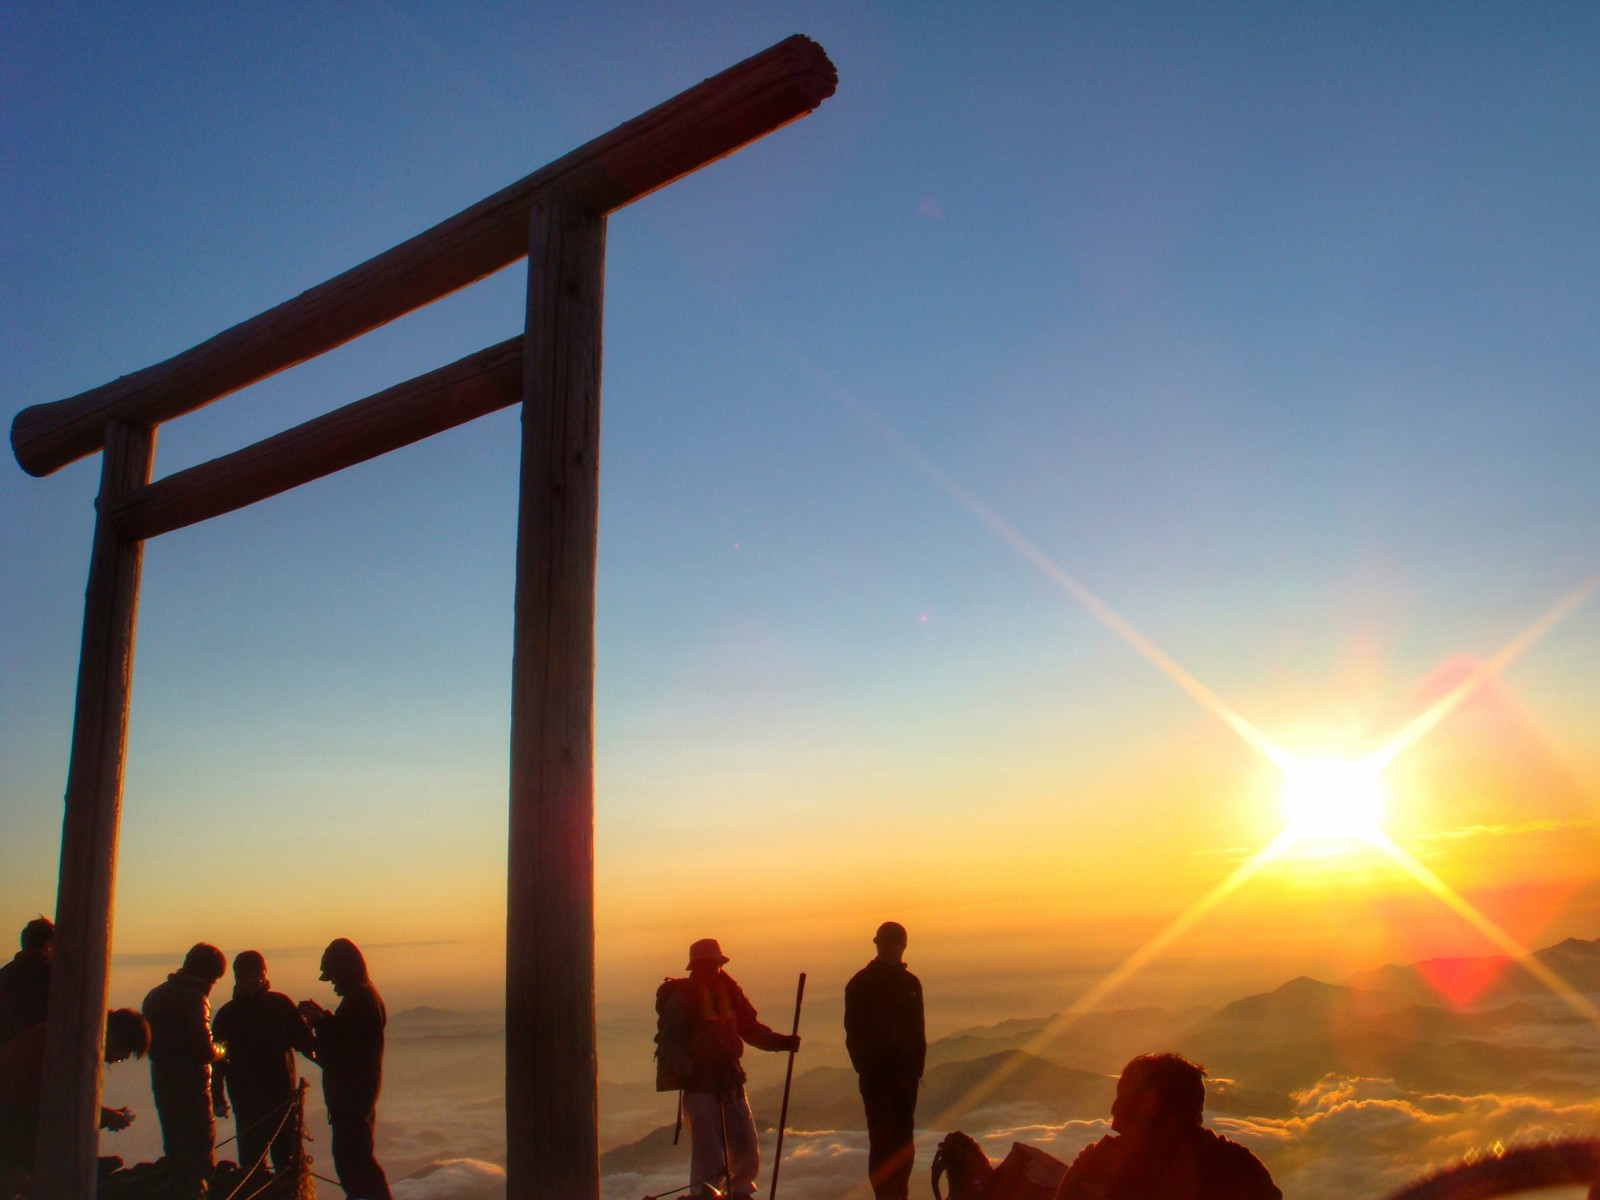 Watching the sunrise at the summit of Mt Fuji